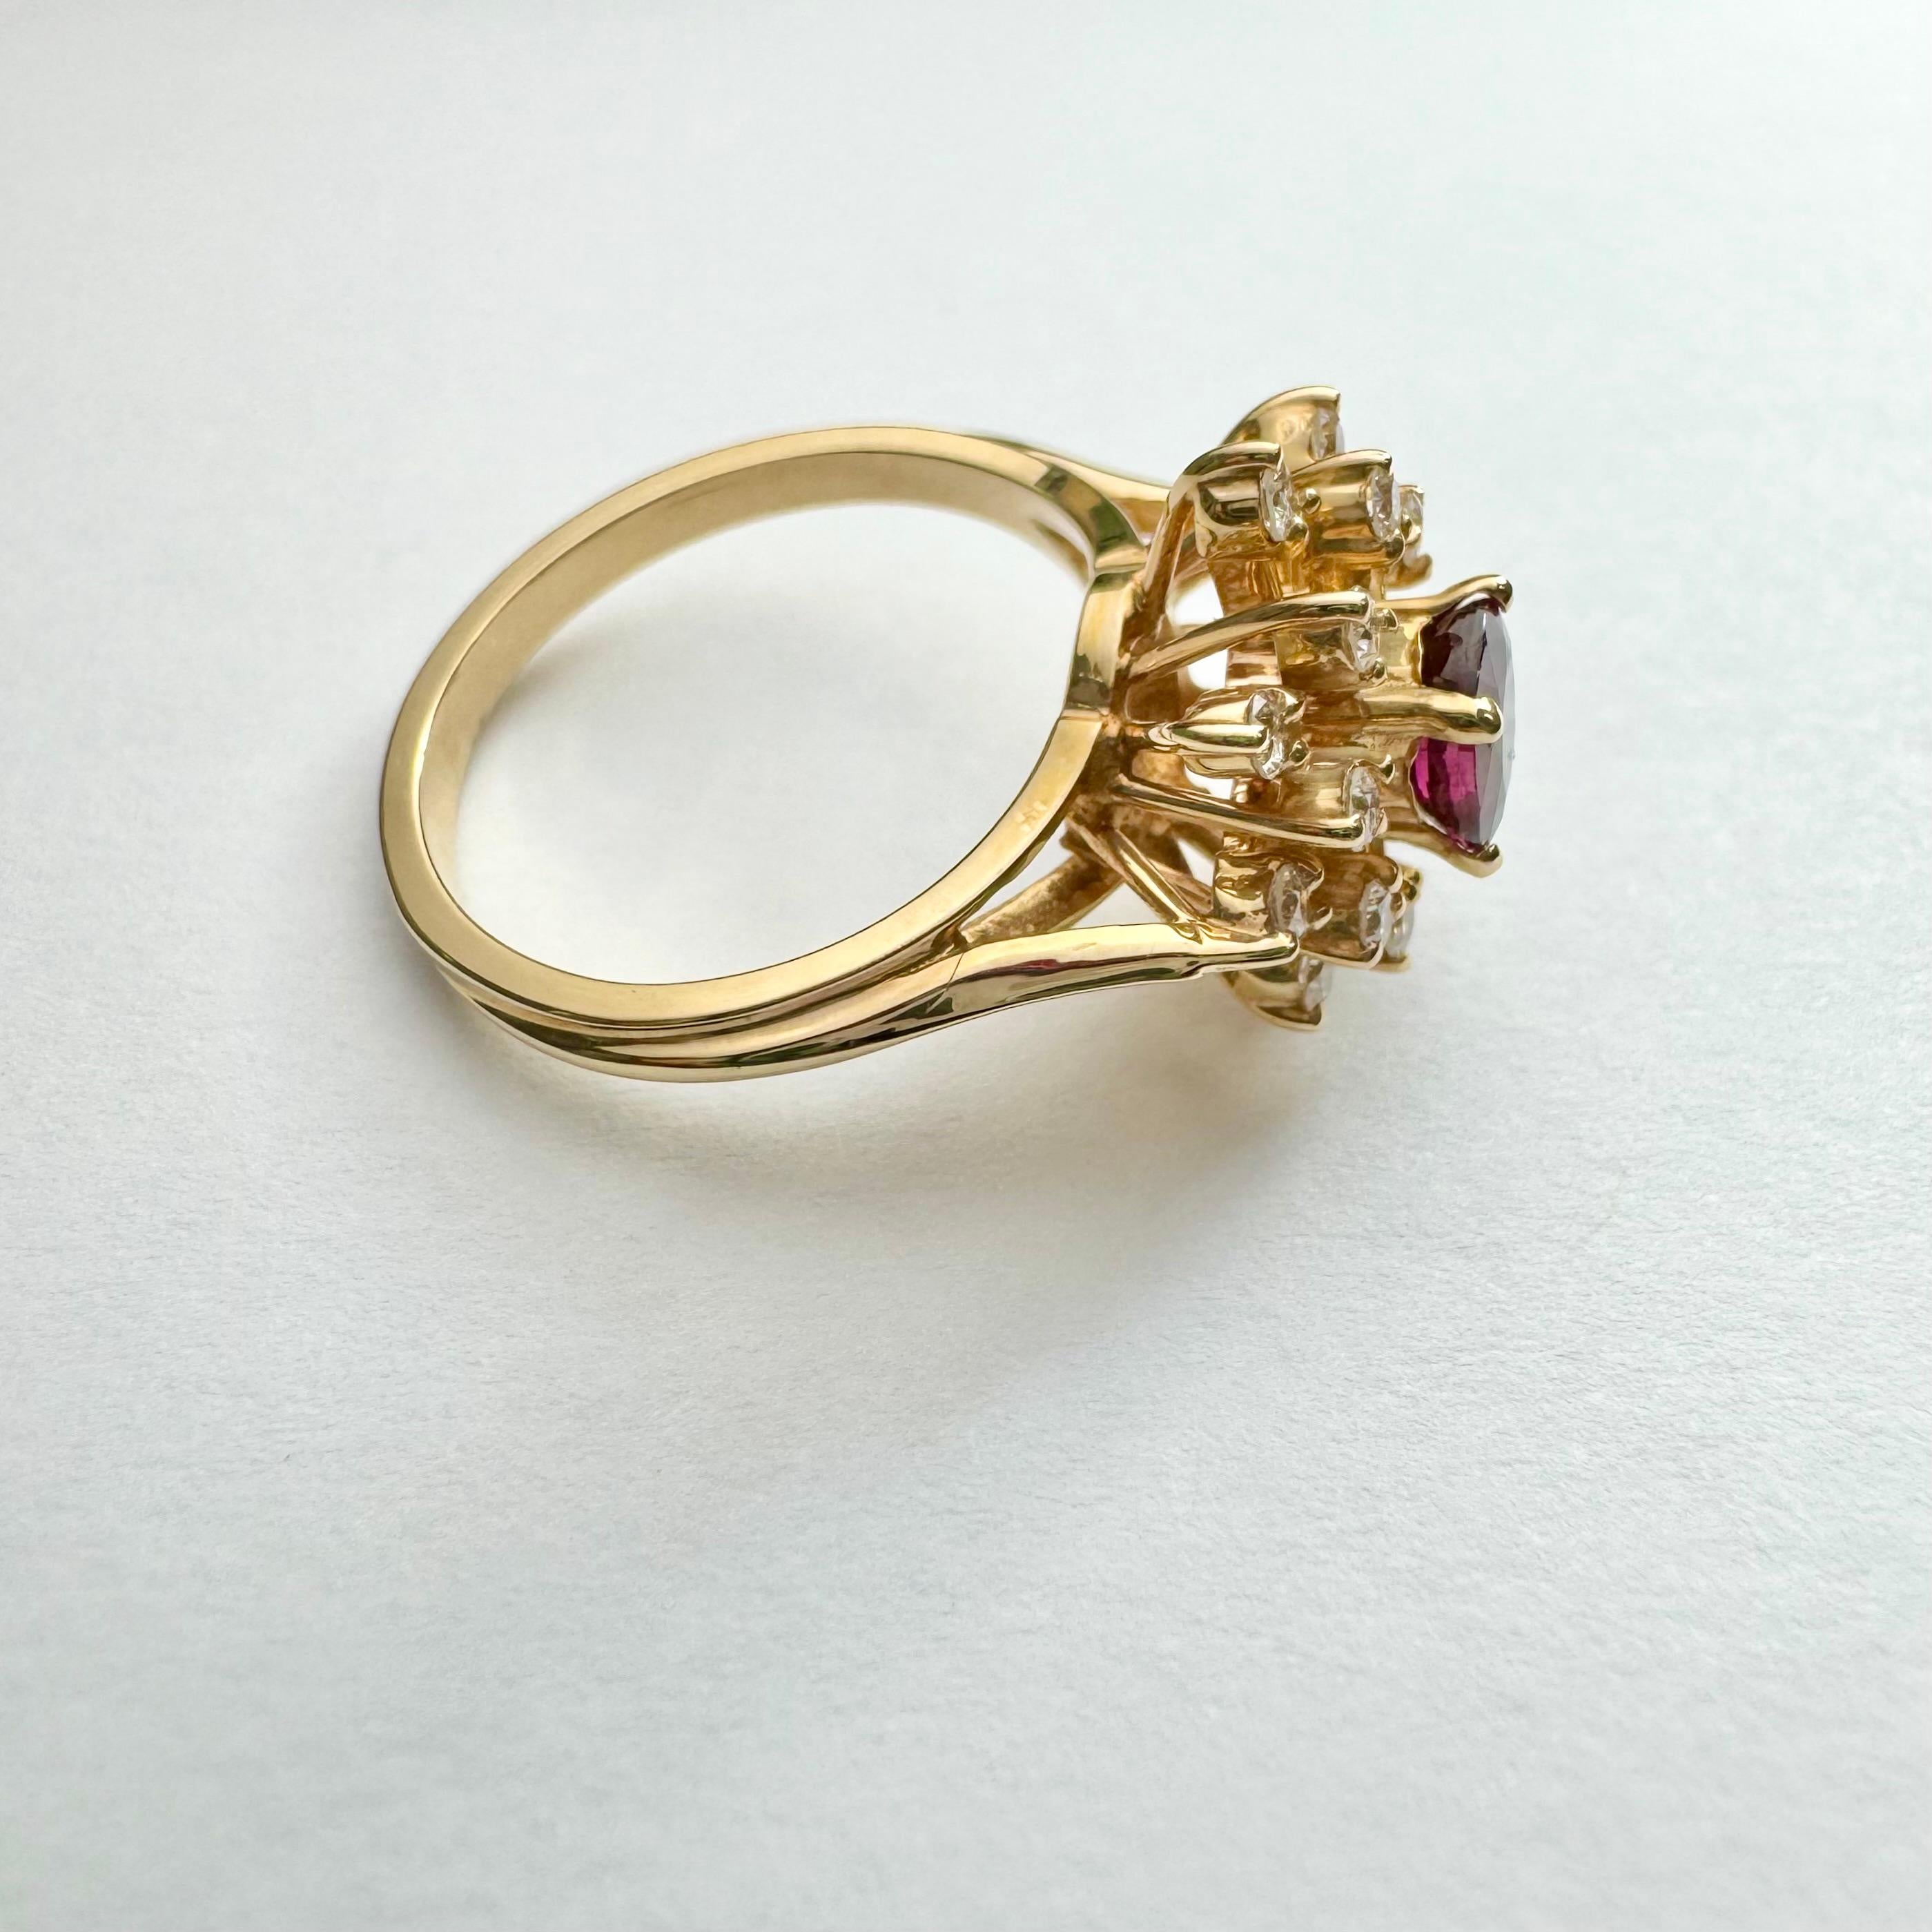 Ruby and Diamond Ring in 14k yellow gold In Excellent Condition For Sale In New York, NY